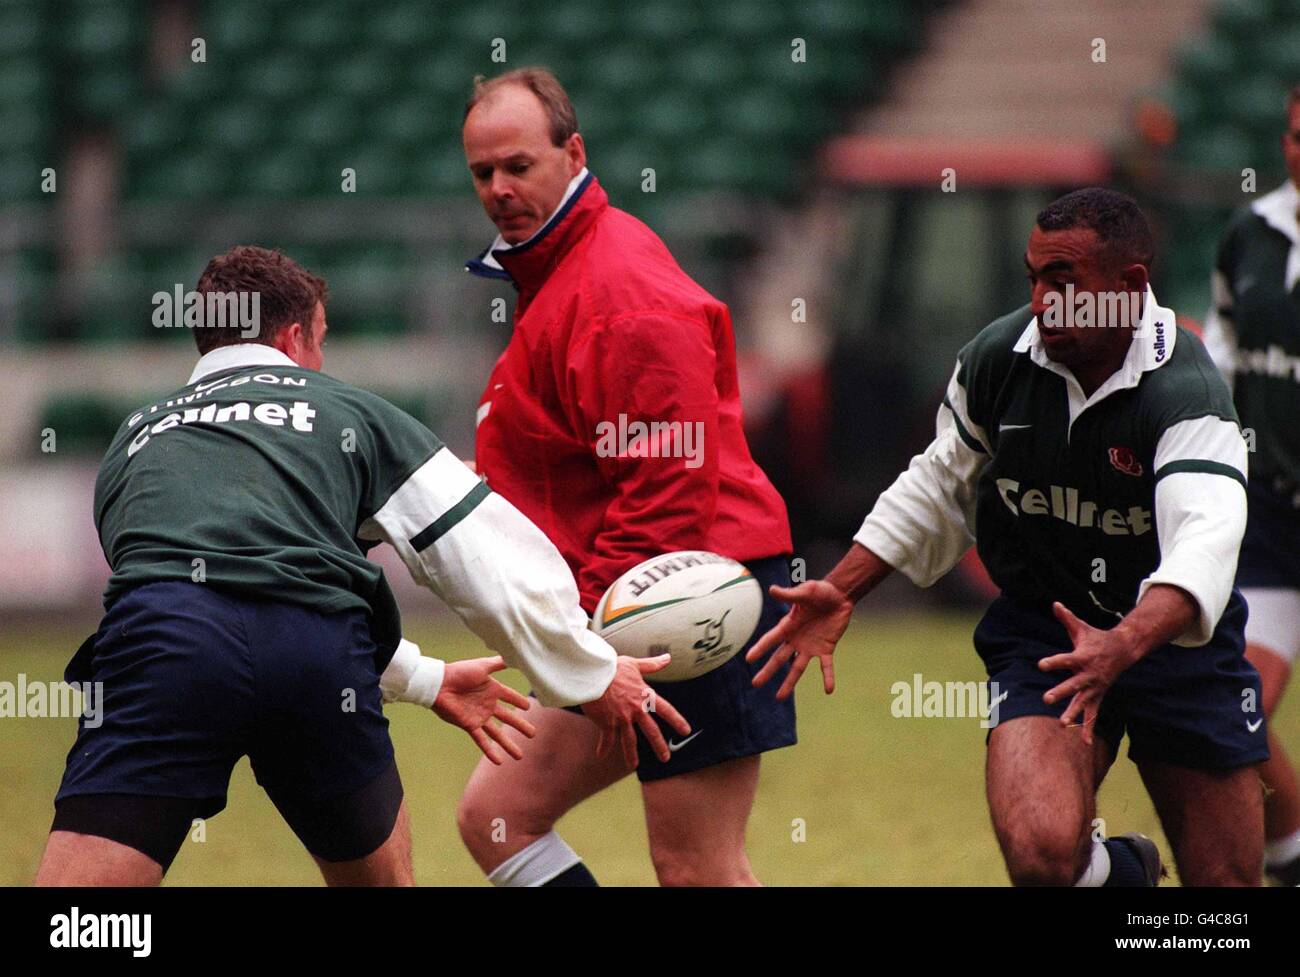 England Rugby coach Clive Woodward (Centre) flanked by his new international, Richmond wing Spencer Brown (right), and Tim Stimpson of Leicester Tigers, during training at Twickenham today (Weds), before they take on